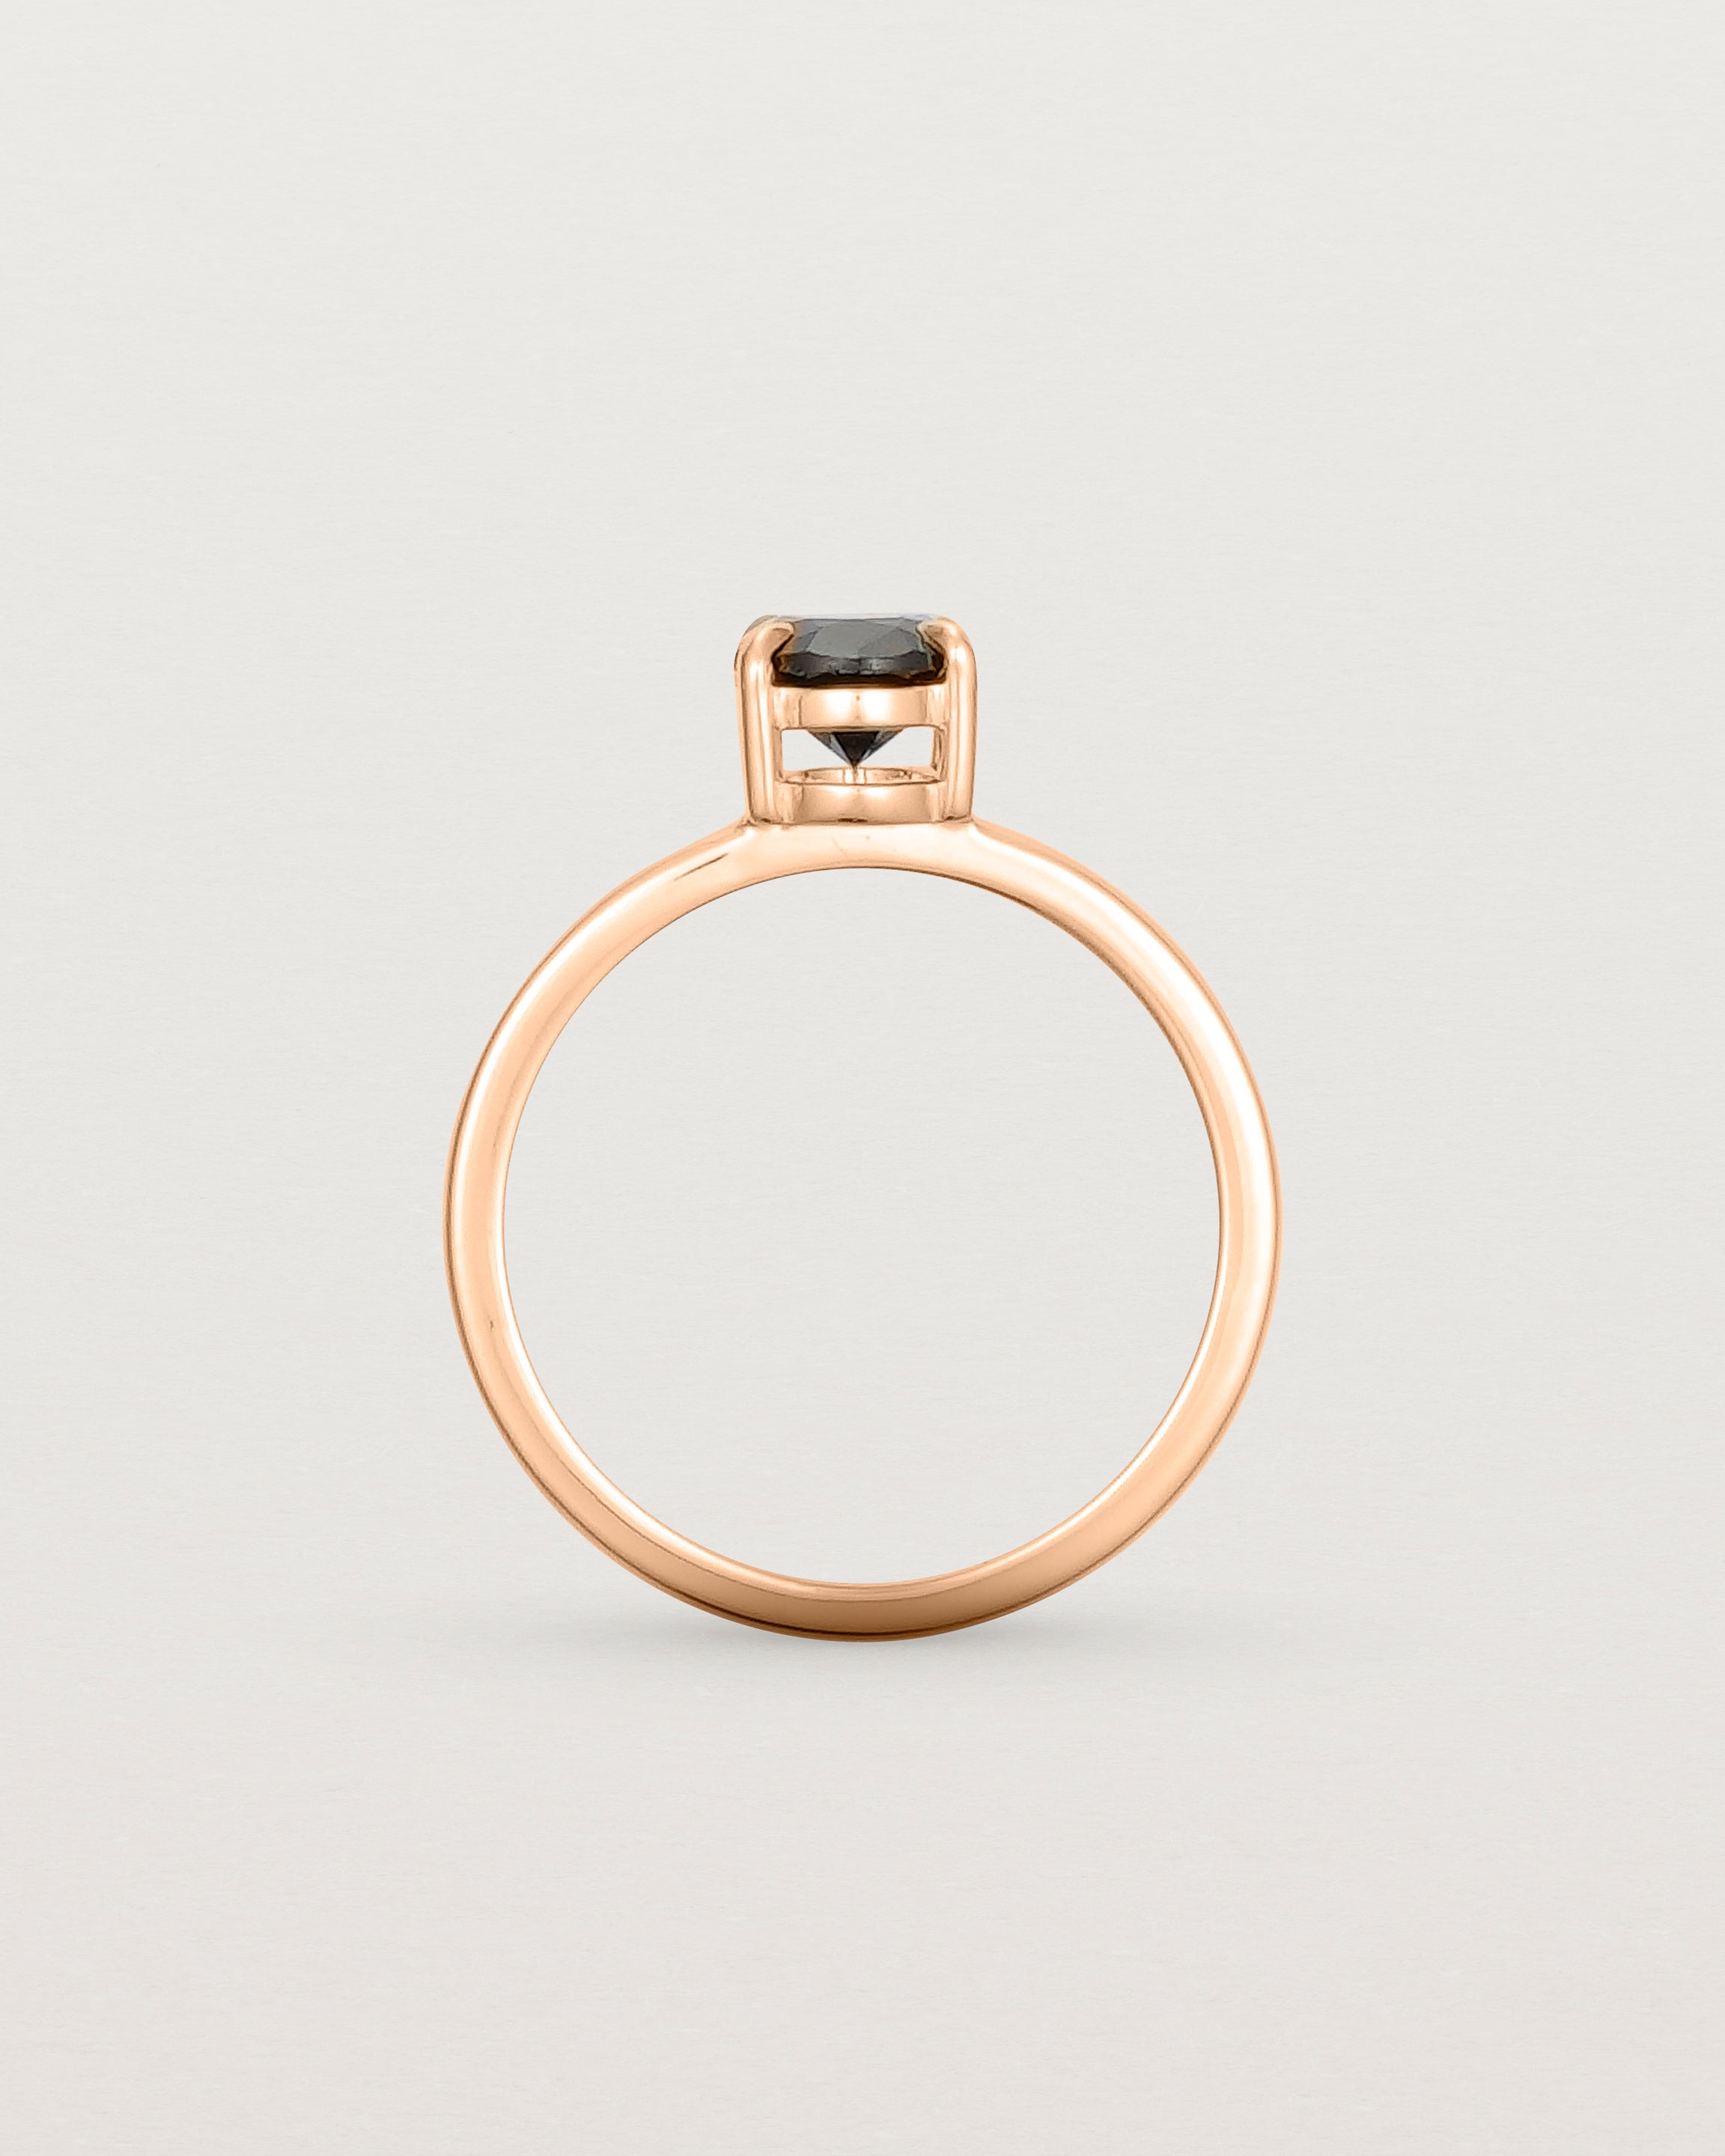 Standing view of the Una Oval Solitaire | Black Spinel | Rose Gold.